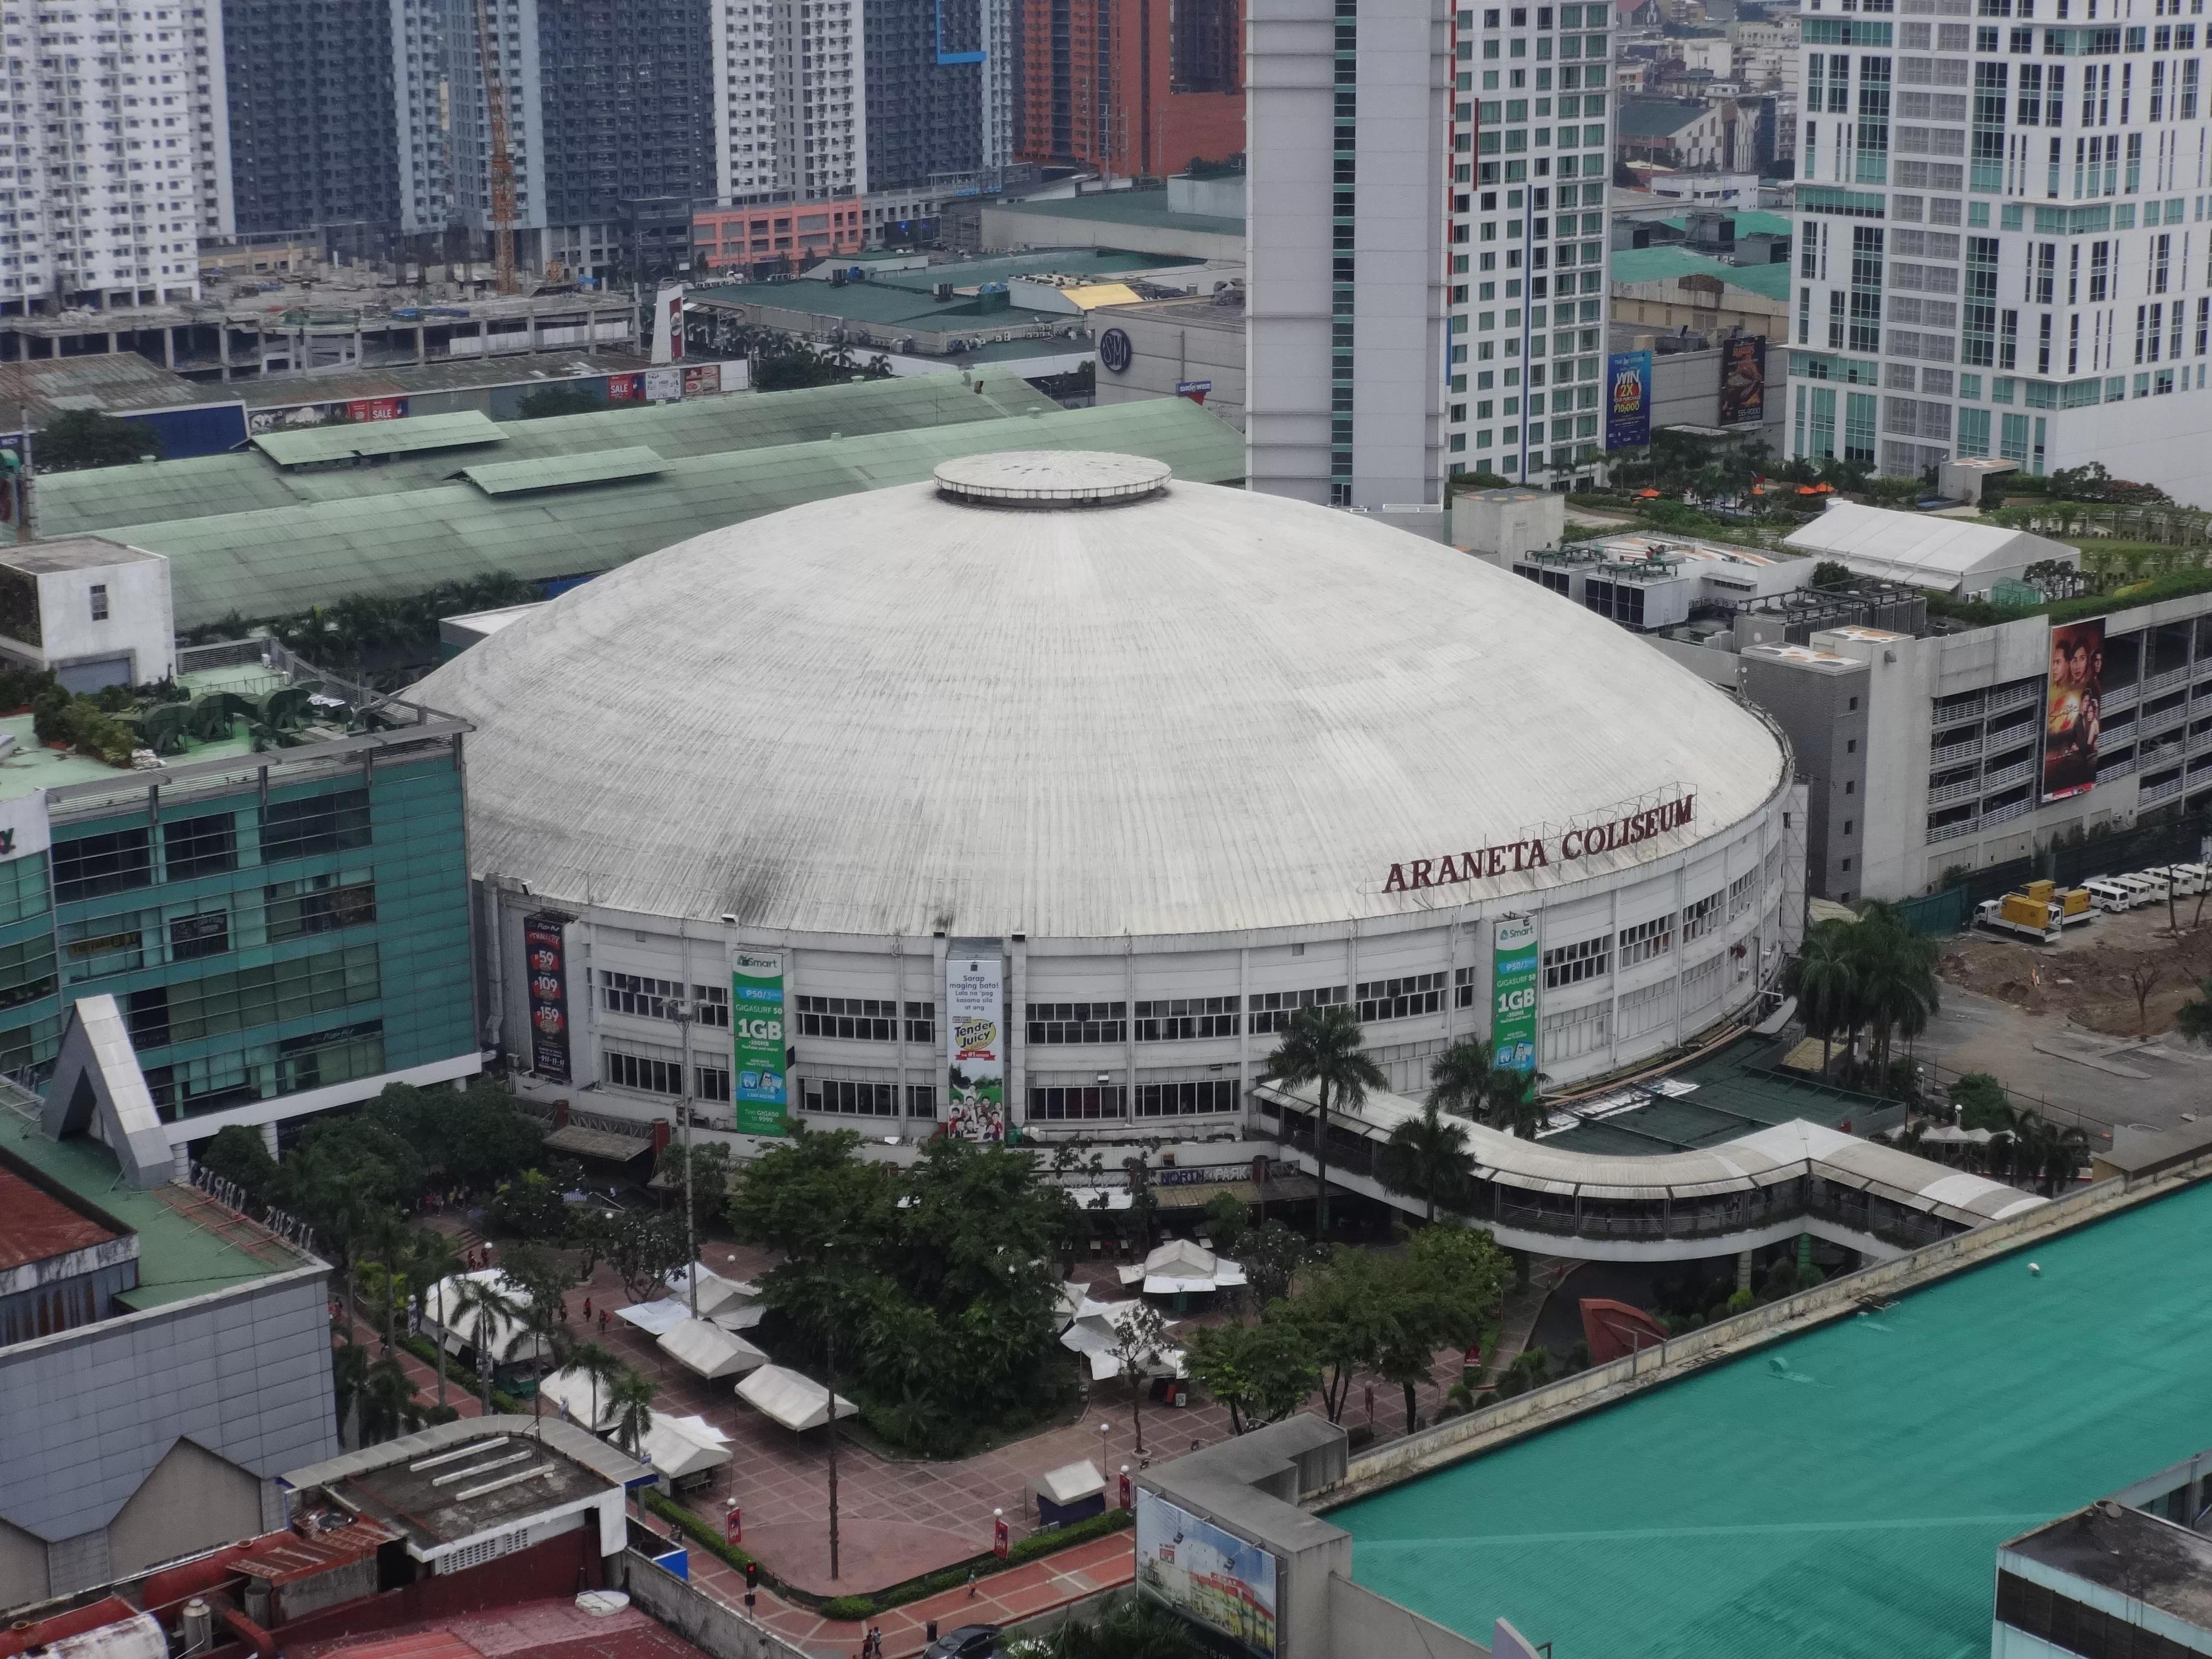 Araneta Coliseum in Philippines, Central Asia | Basketball - Rated 3.7